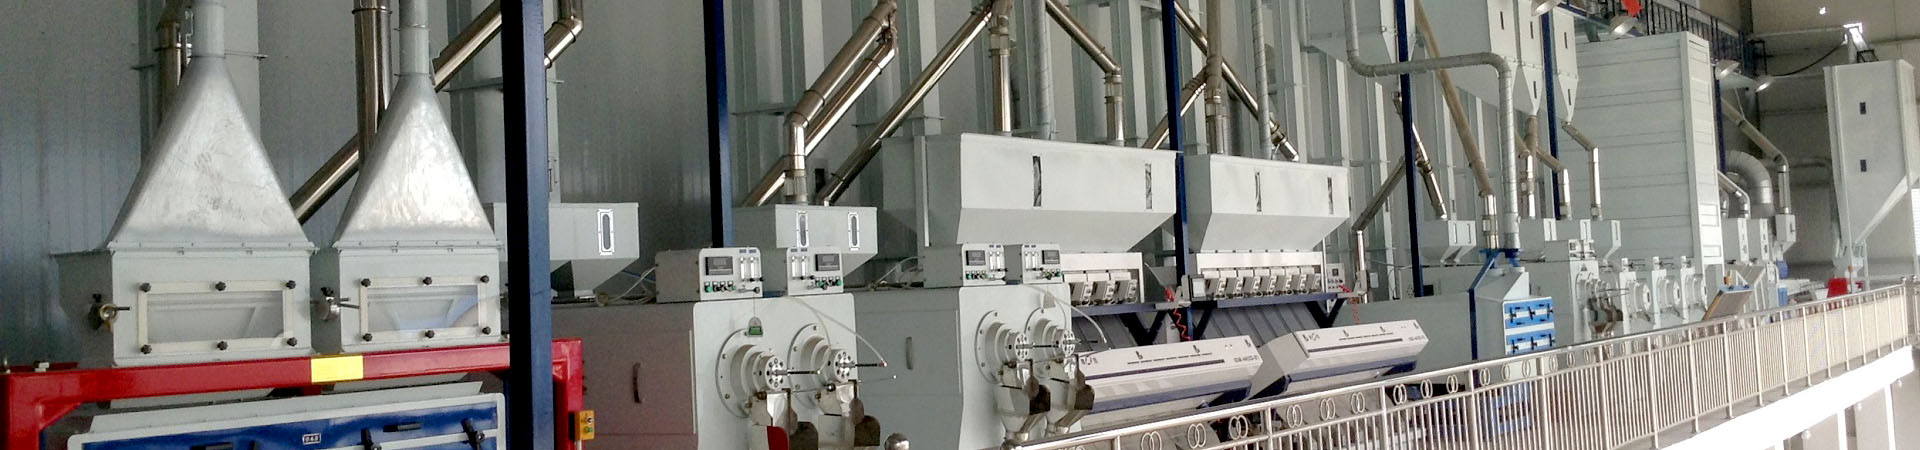 40-50TPD Complete Rice Mill Plant